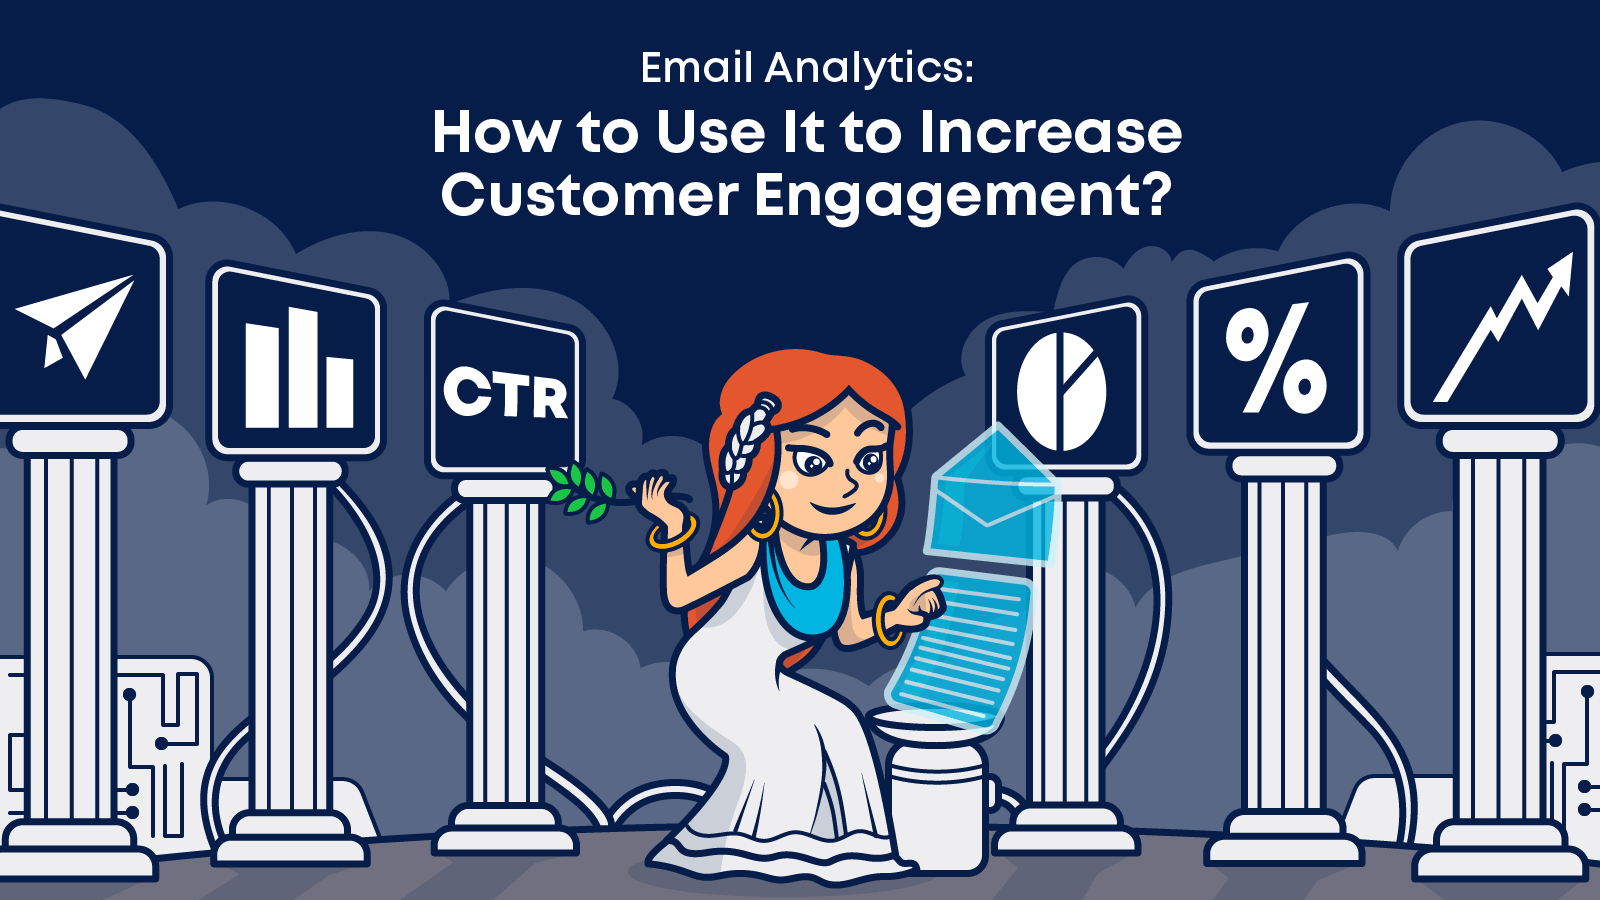 How email analytics can drive engagement